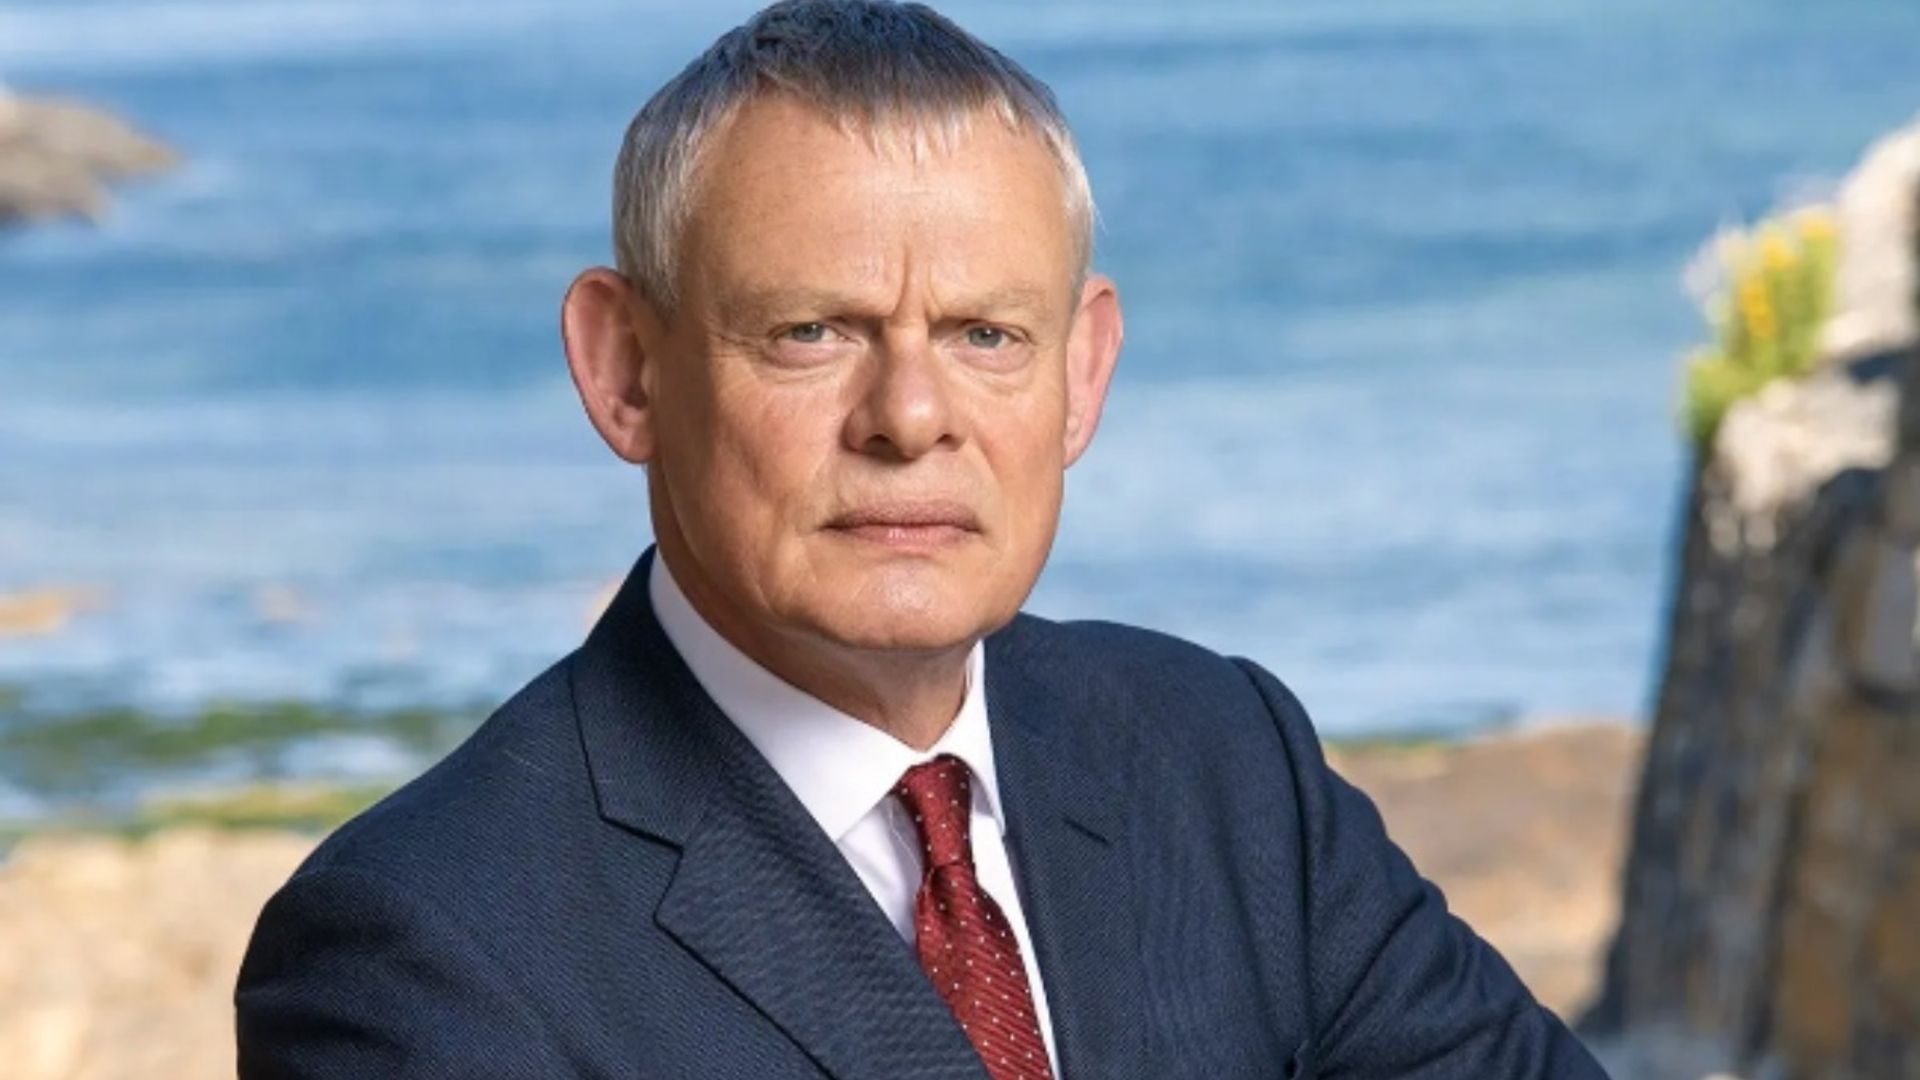 Meet Doc Martin star Martin Clunes' well-known daughter who appeared on the show